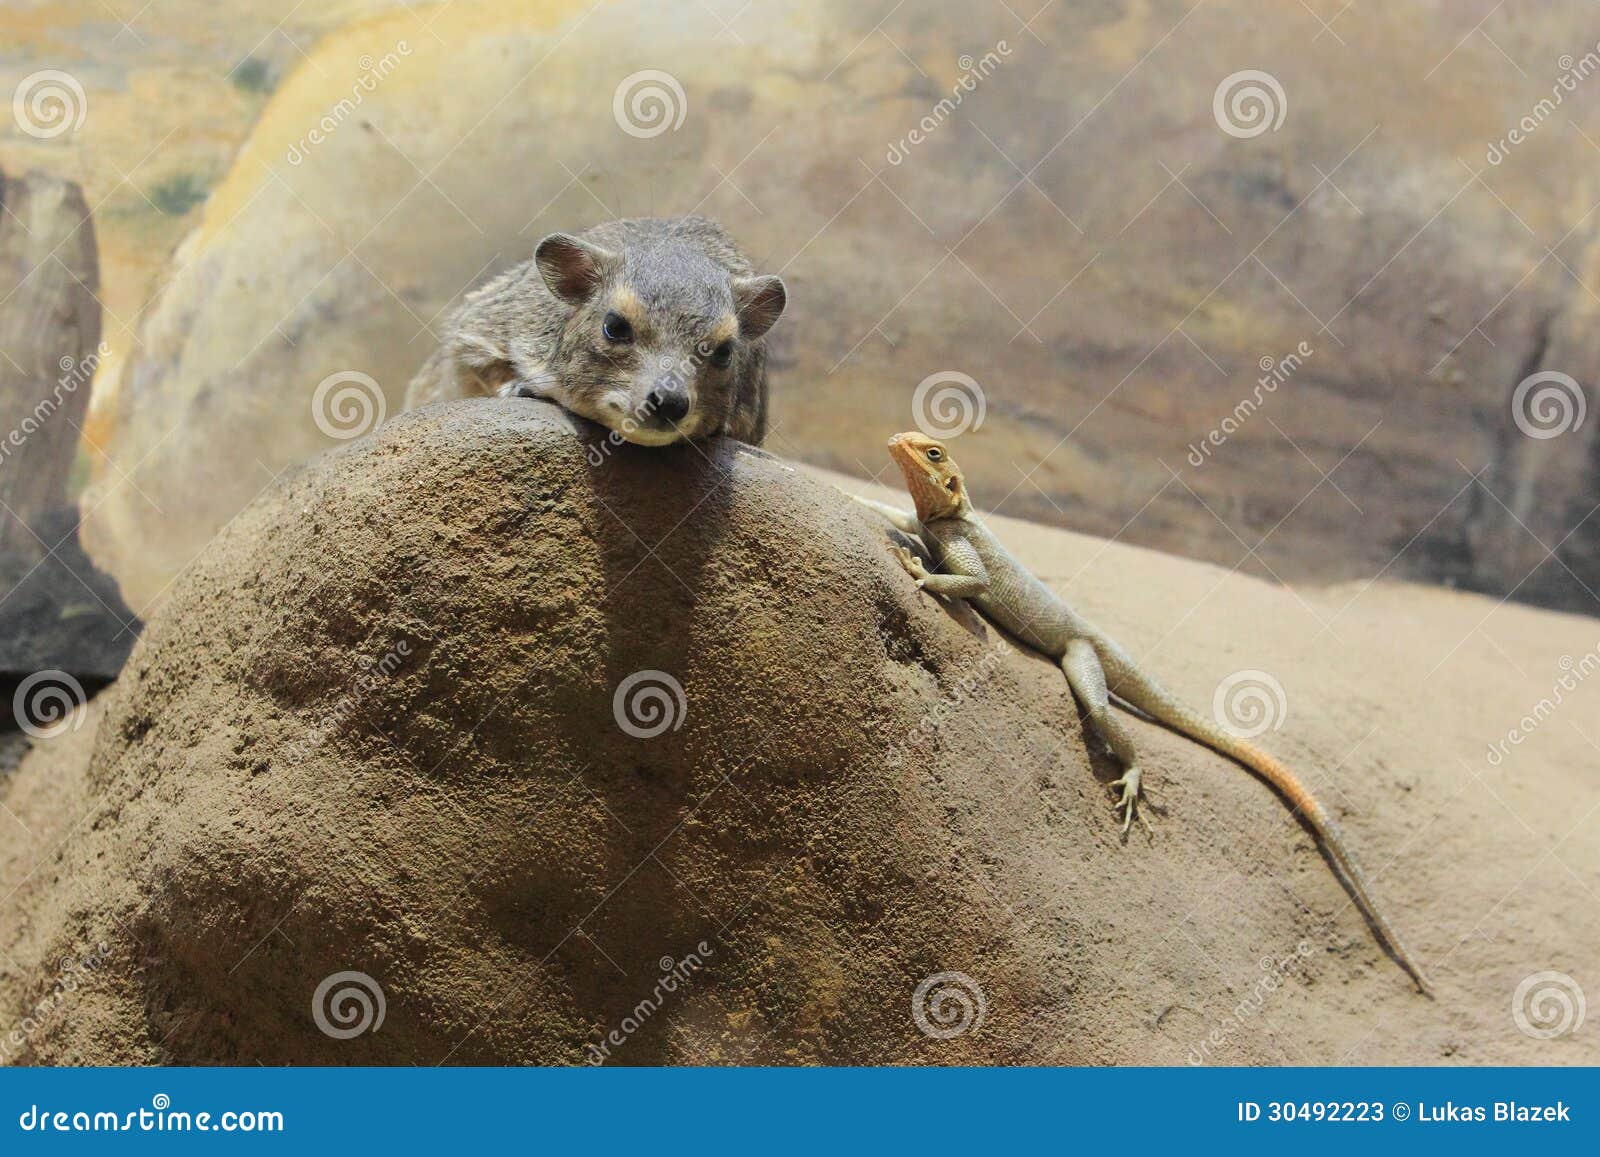 yellow-spotted rock hyrax